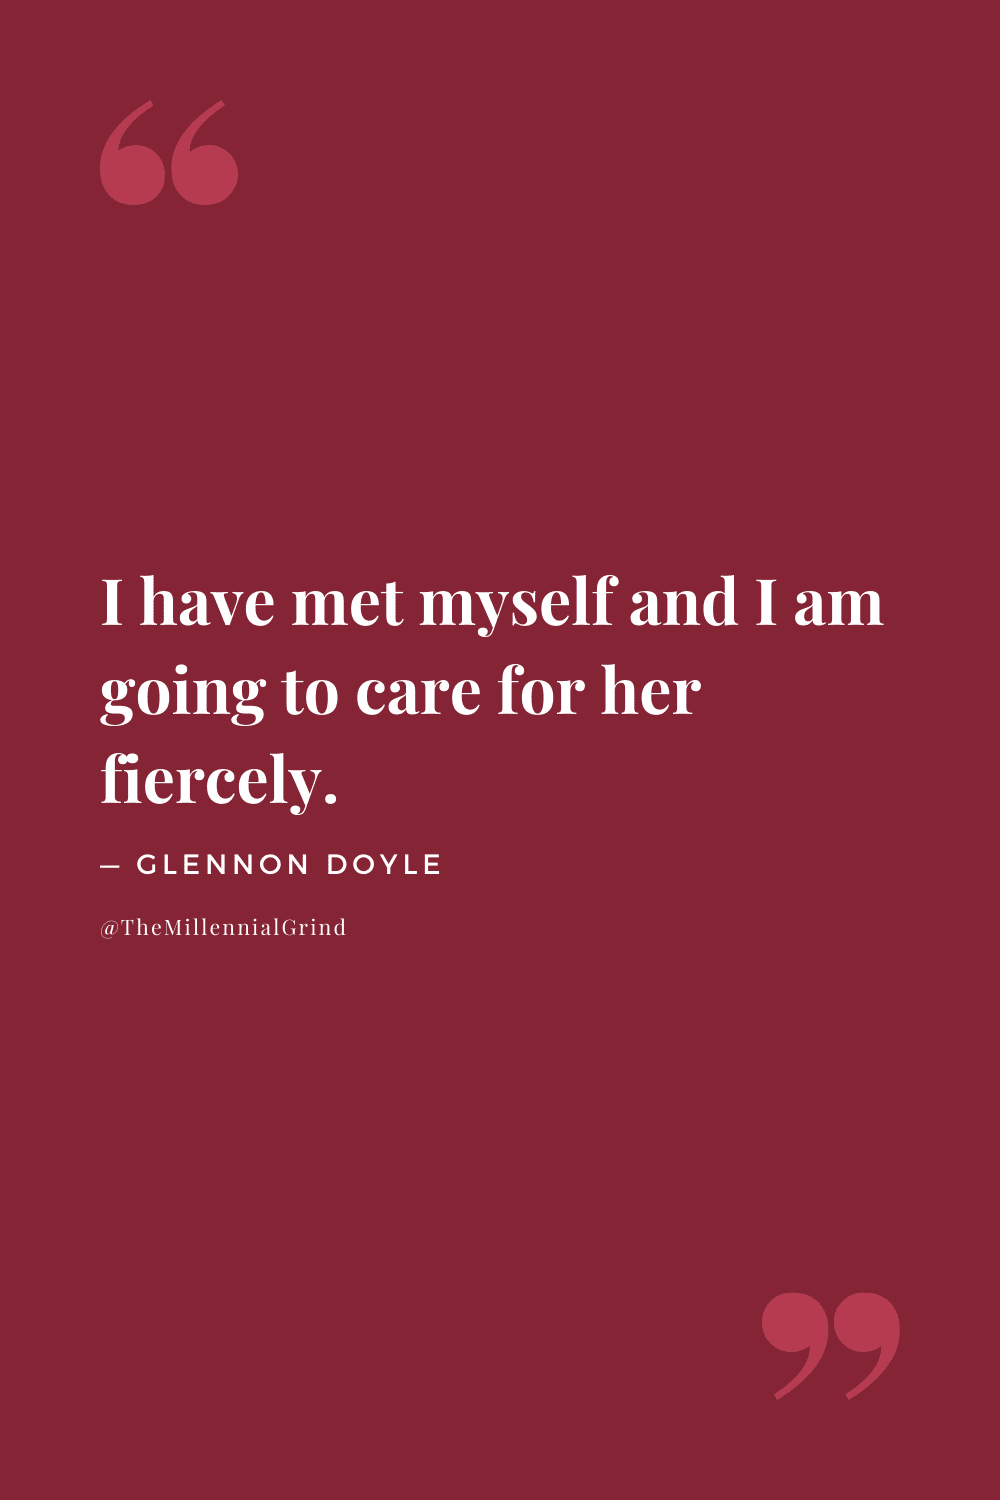 Quotes from Love Warrior by Glennon Doyle